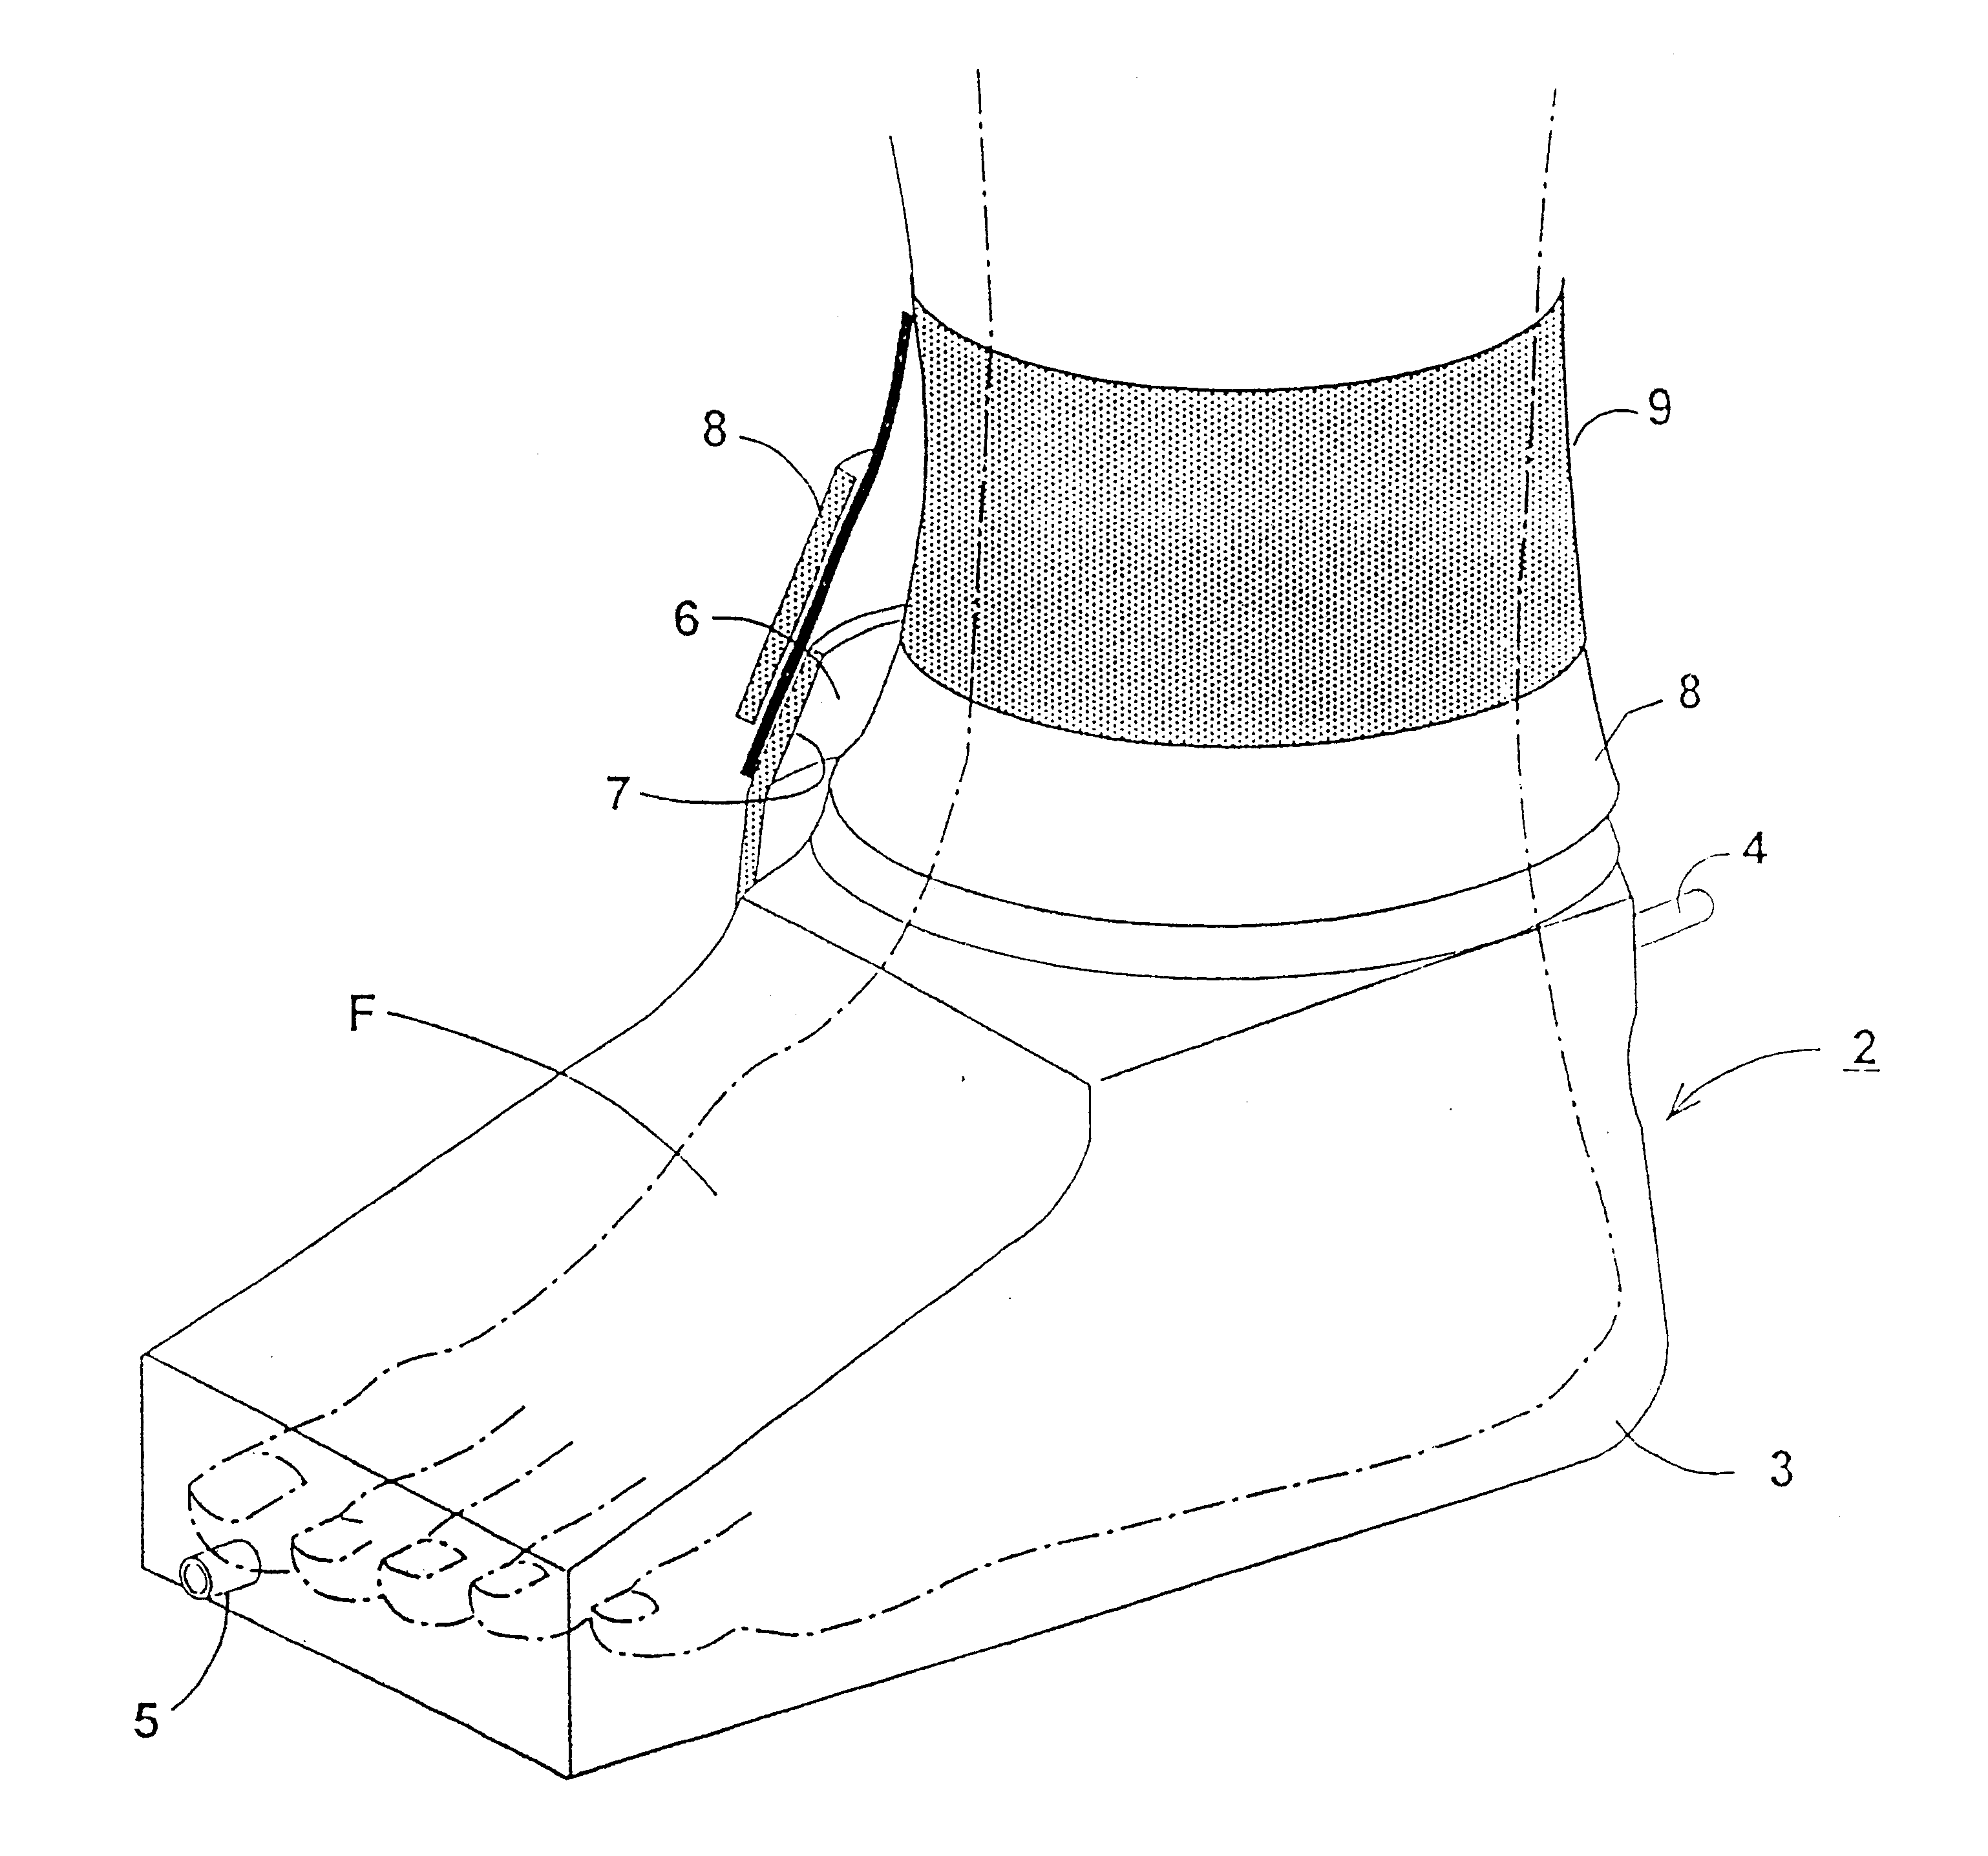 Apparatus and method of treatment of wounds, burns and immune system disorders